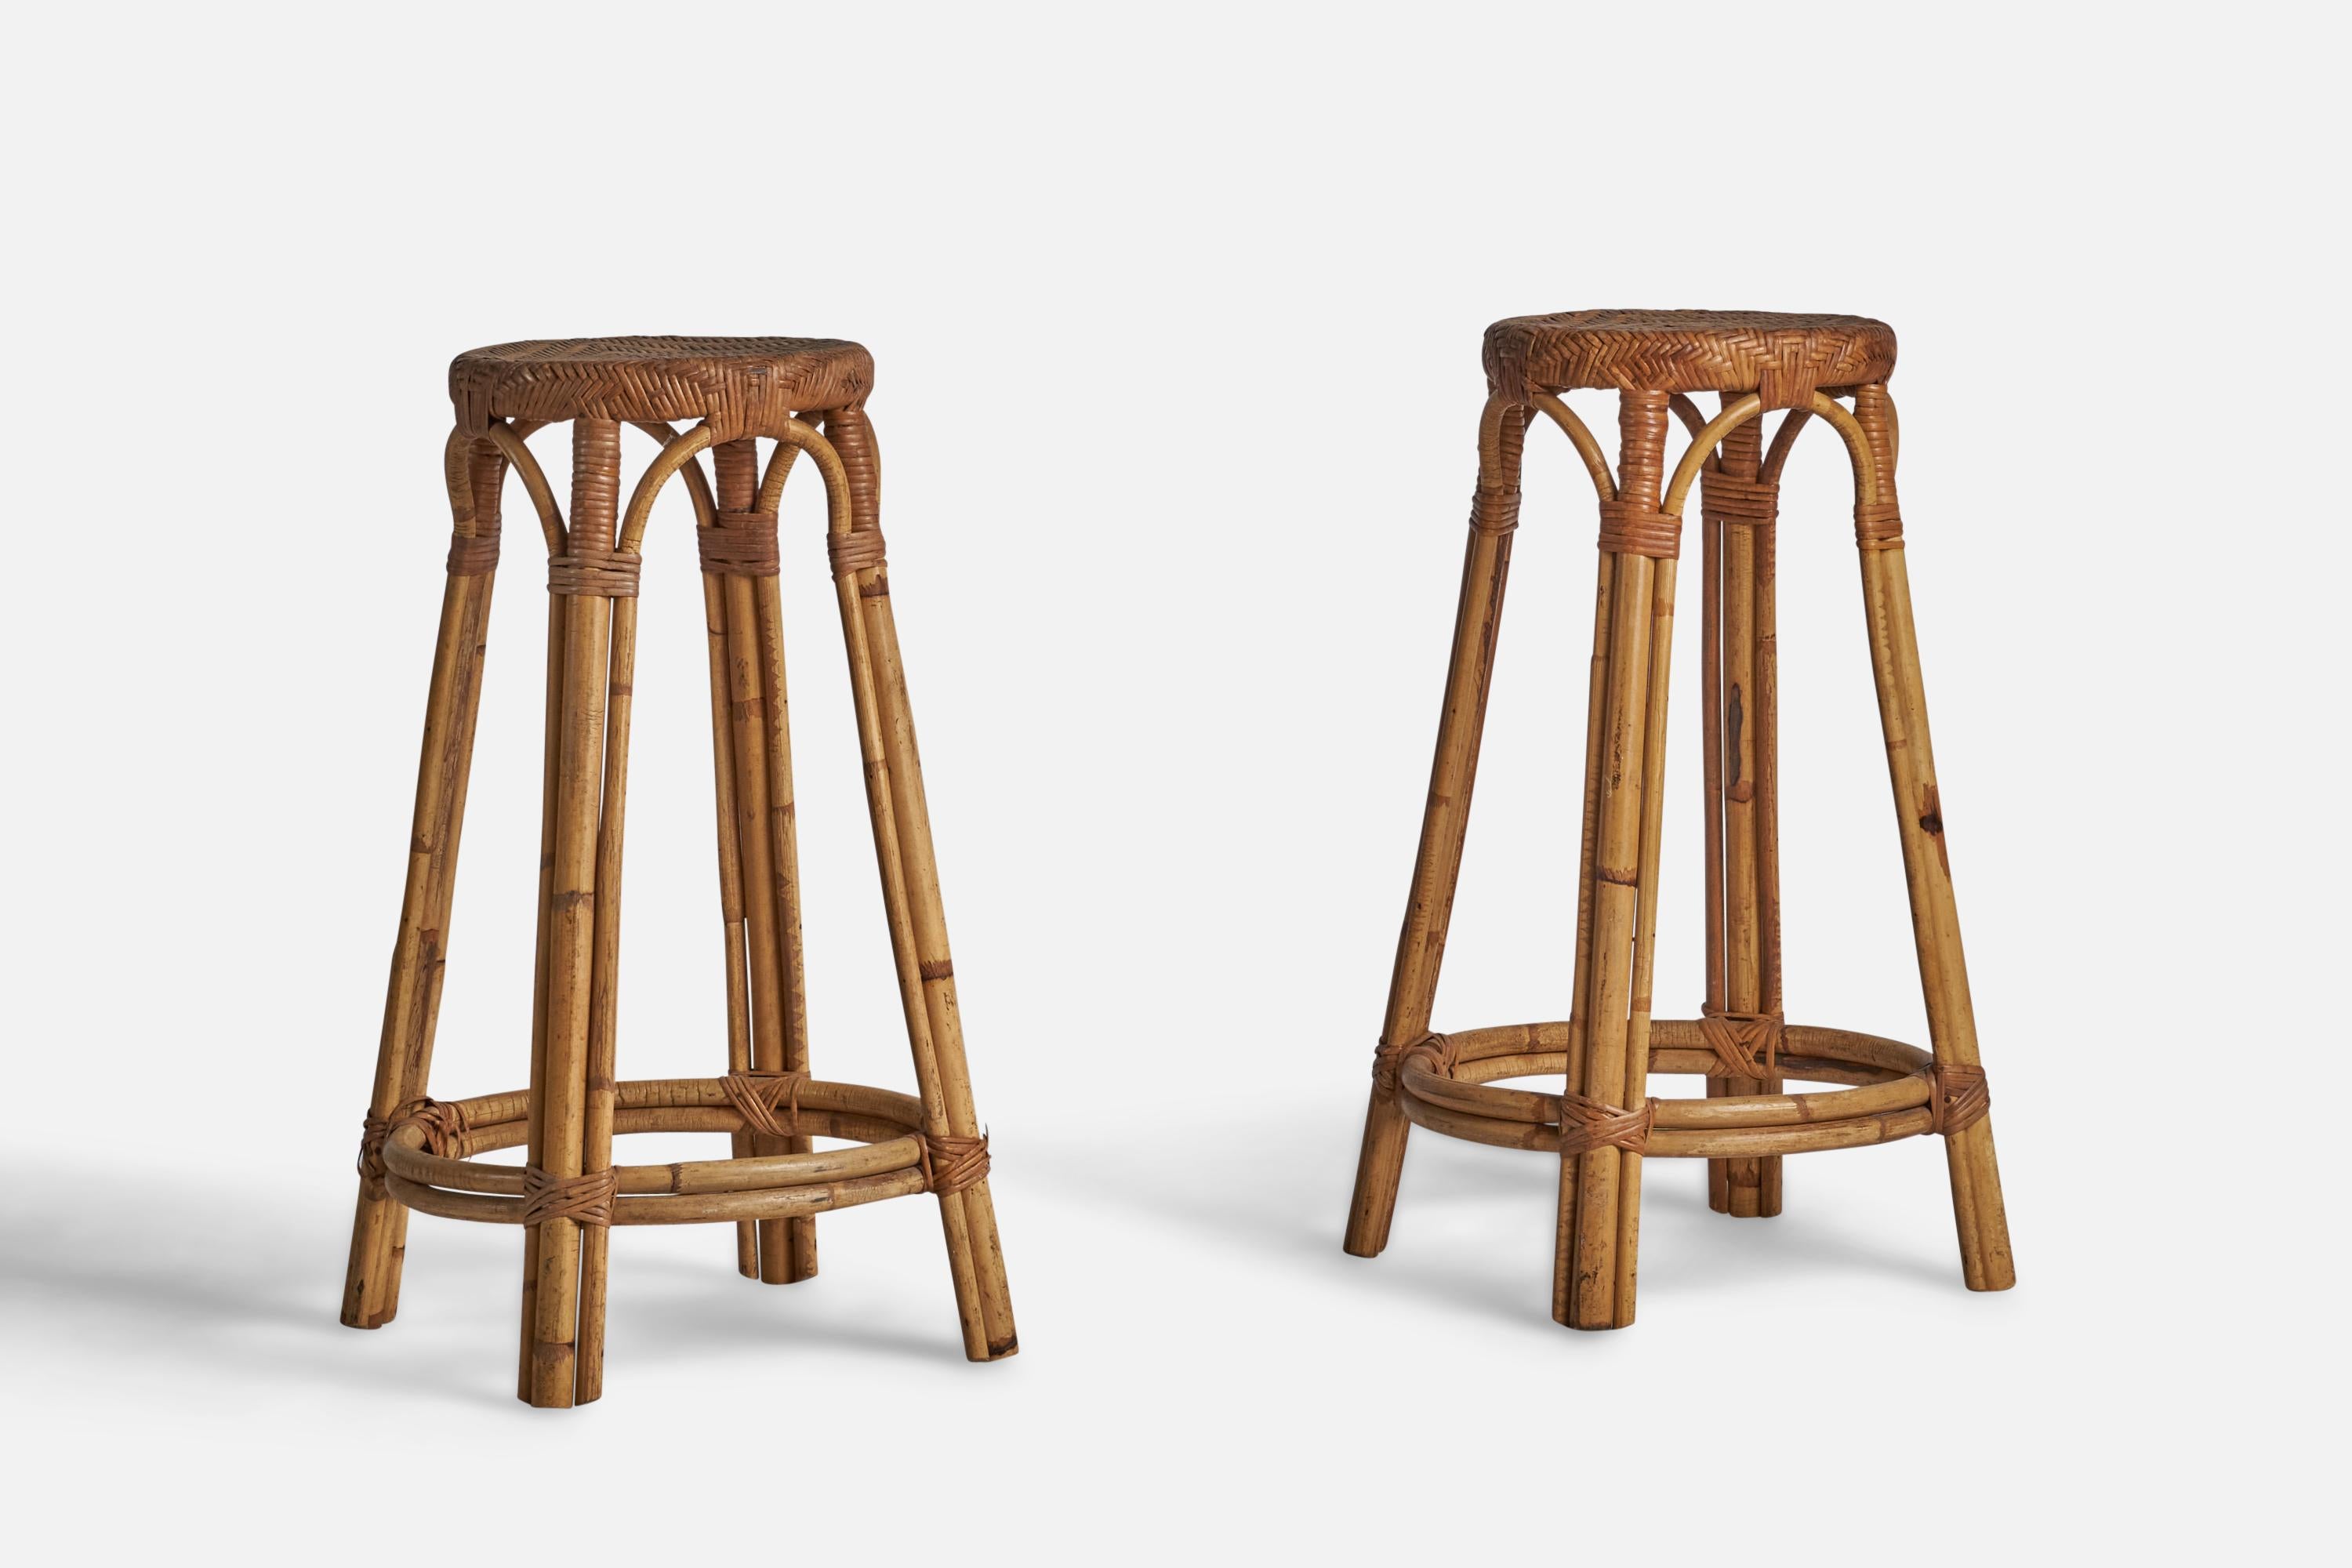 A pair of bamboo and rattan bar stools designed and produced in the US, 1950s.